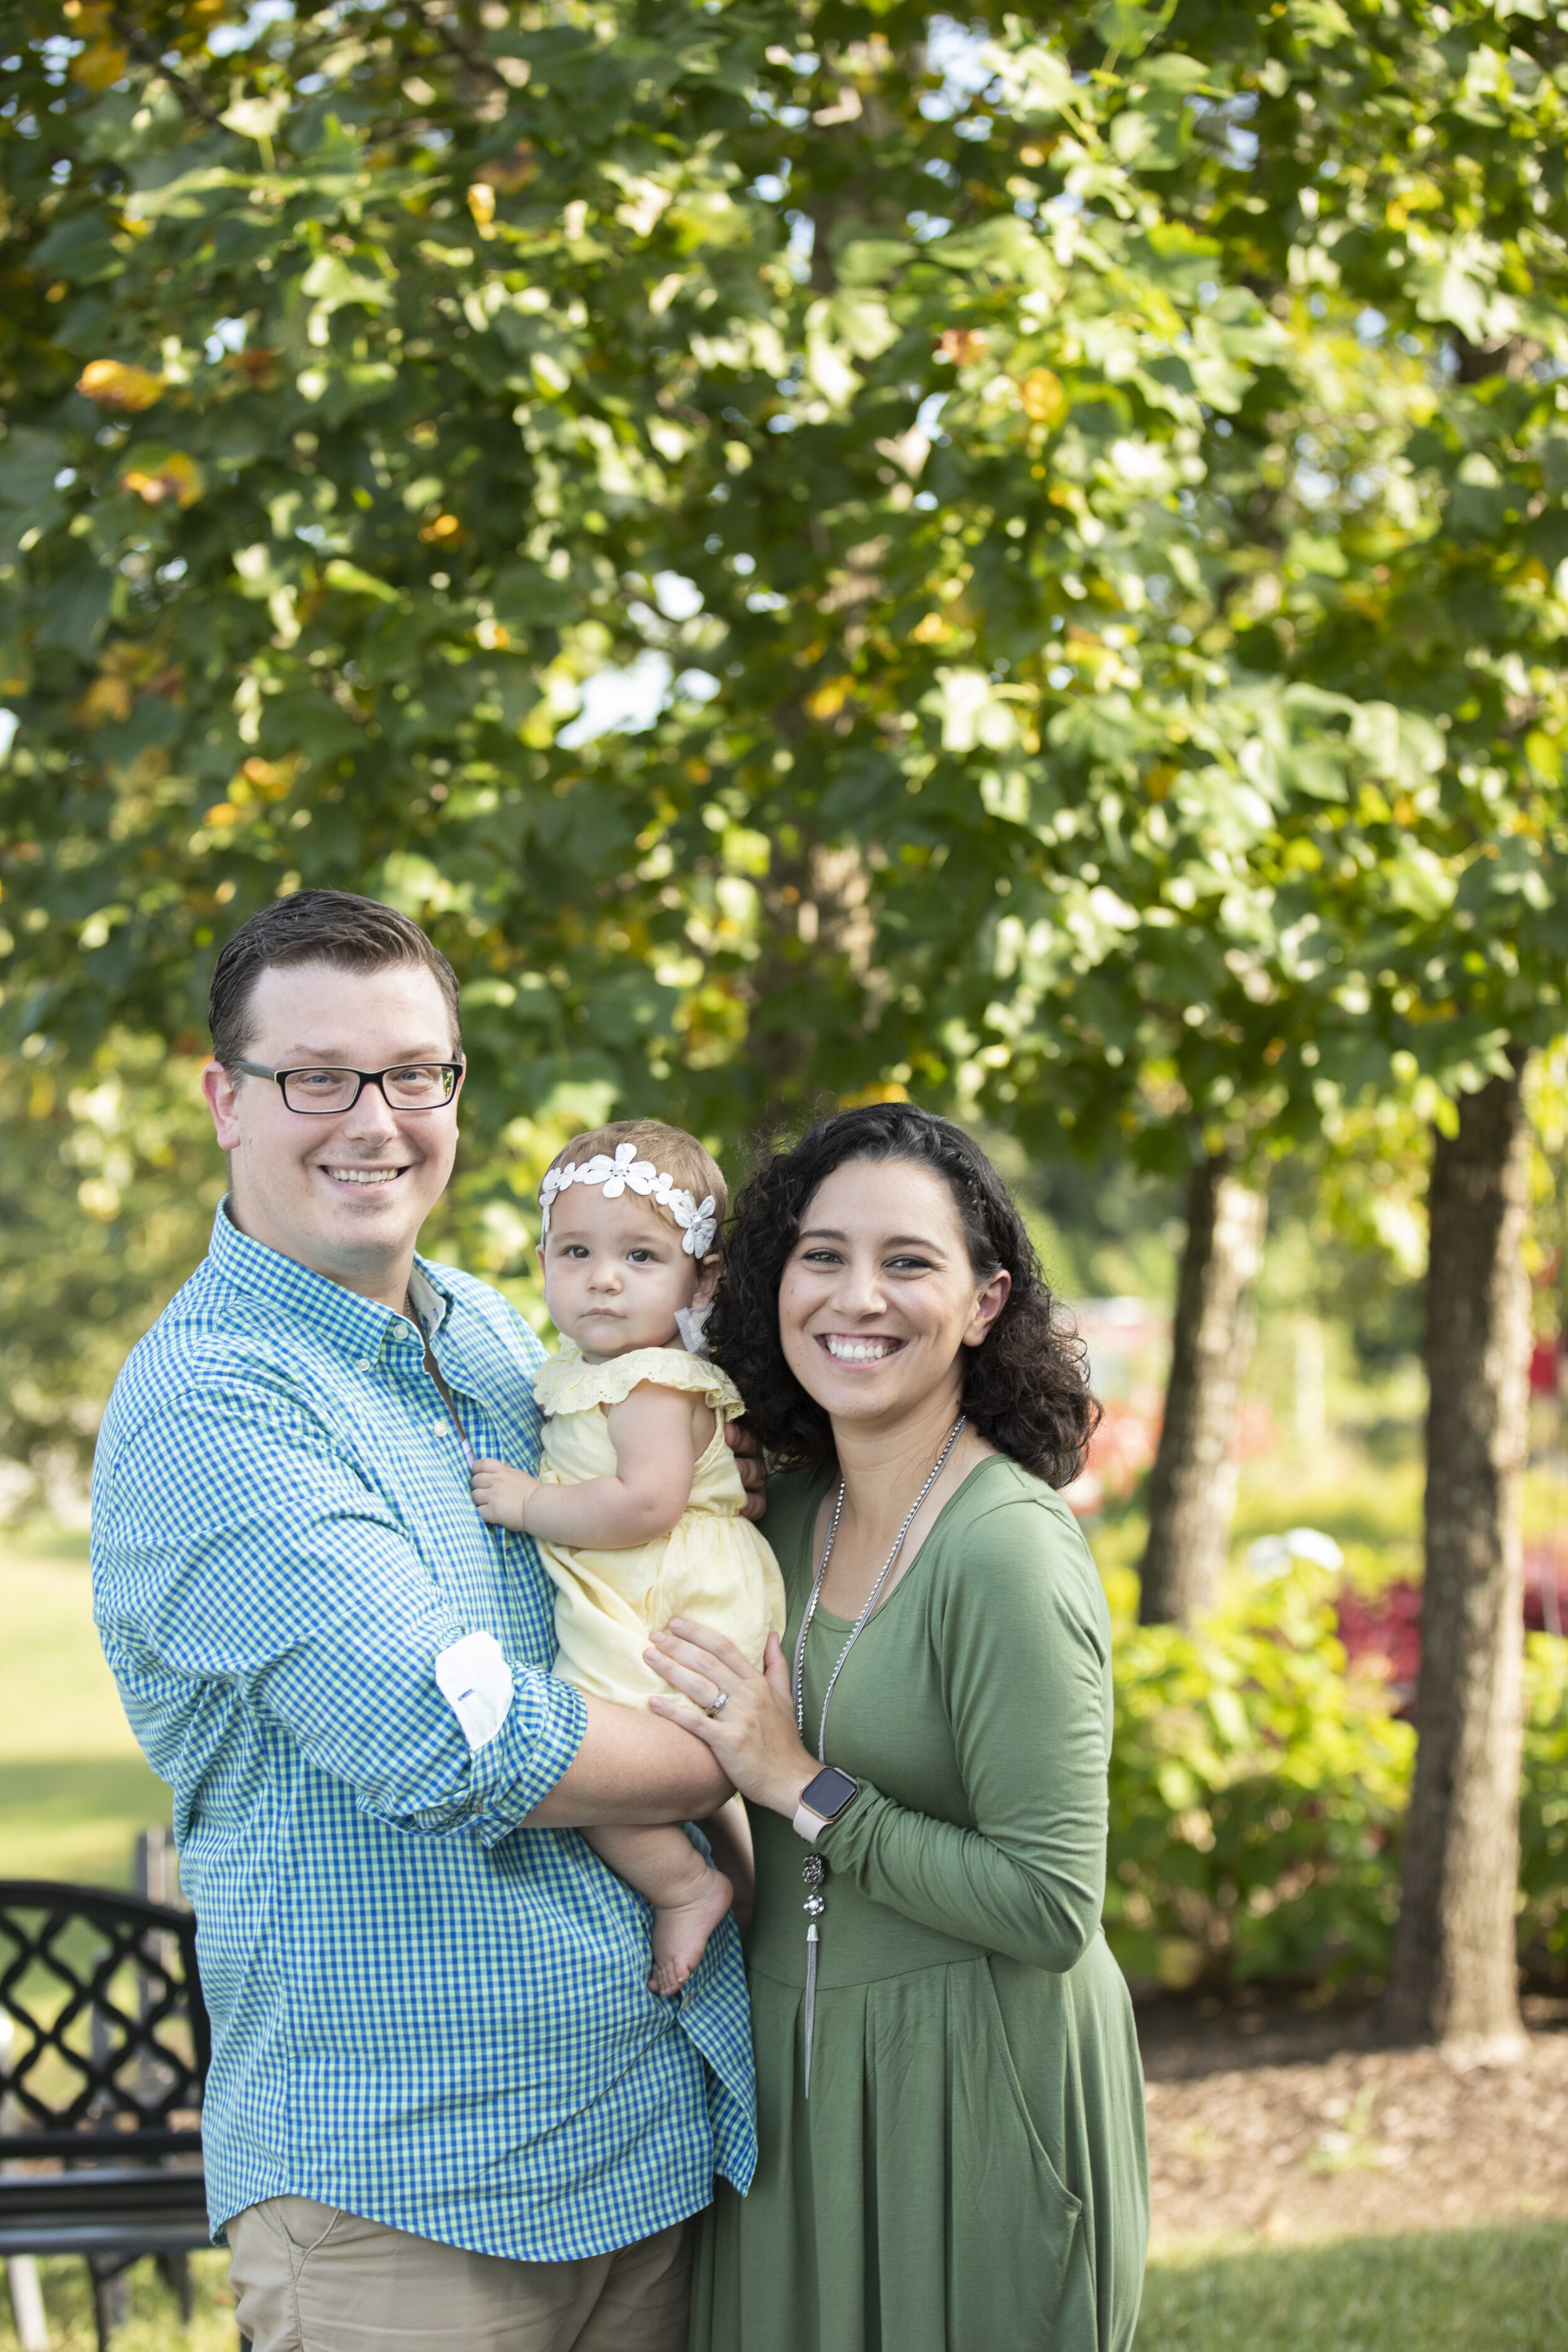  Images of Family Photo Shoot taken by Murawski Photography 